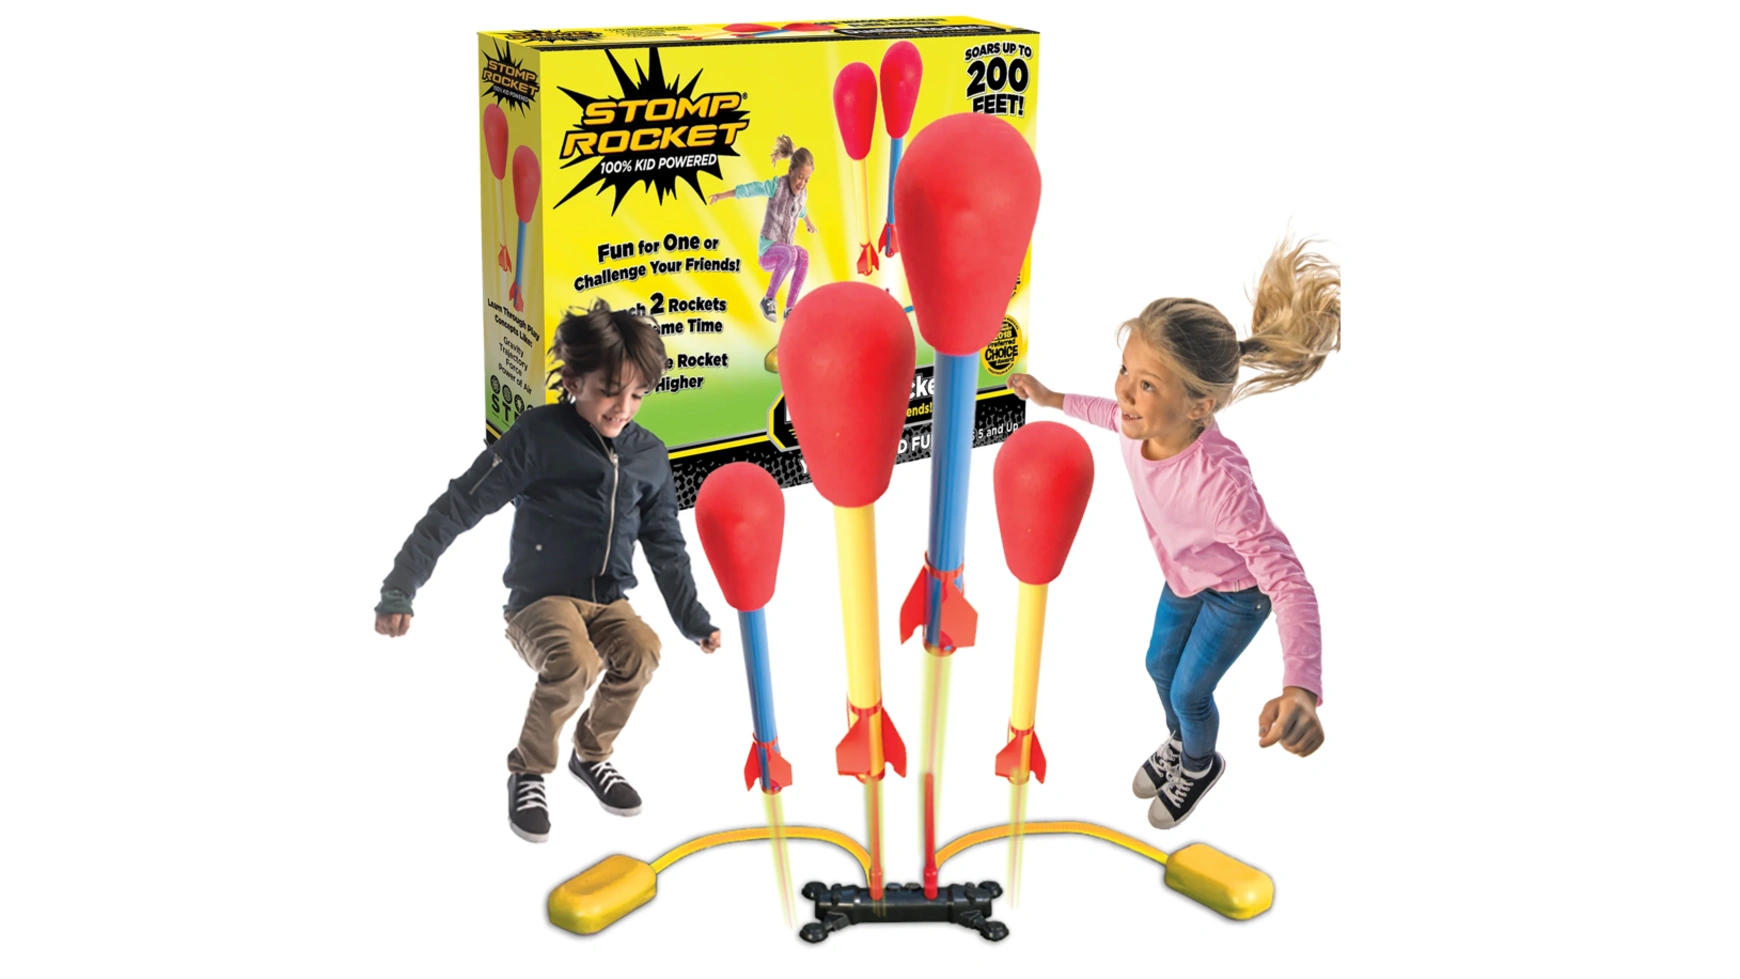 air power stomp rocket launcher toys famous game outdoor games sport toy fly shining led light rocket adjustable super stable Stomp Rocket Дуэль